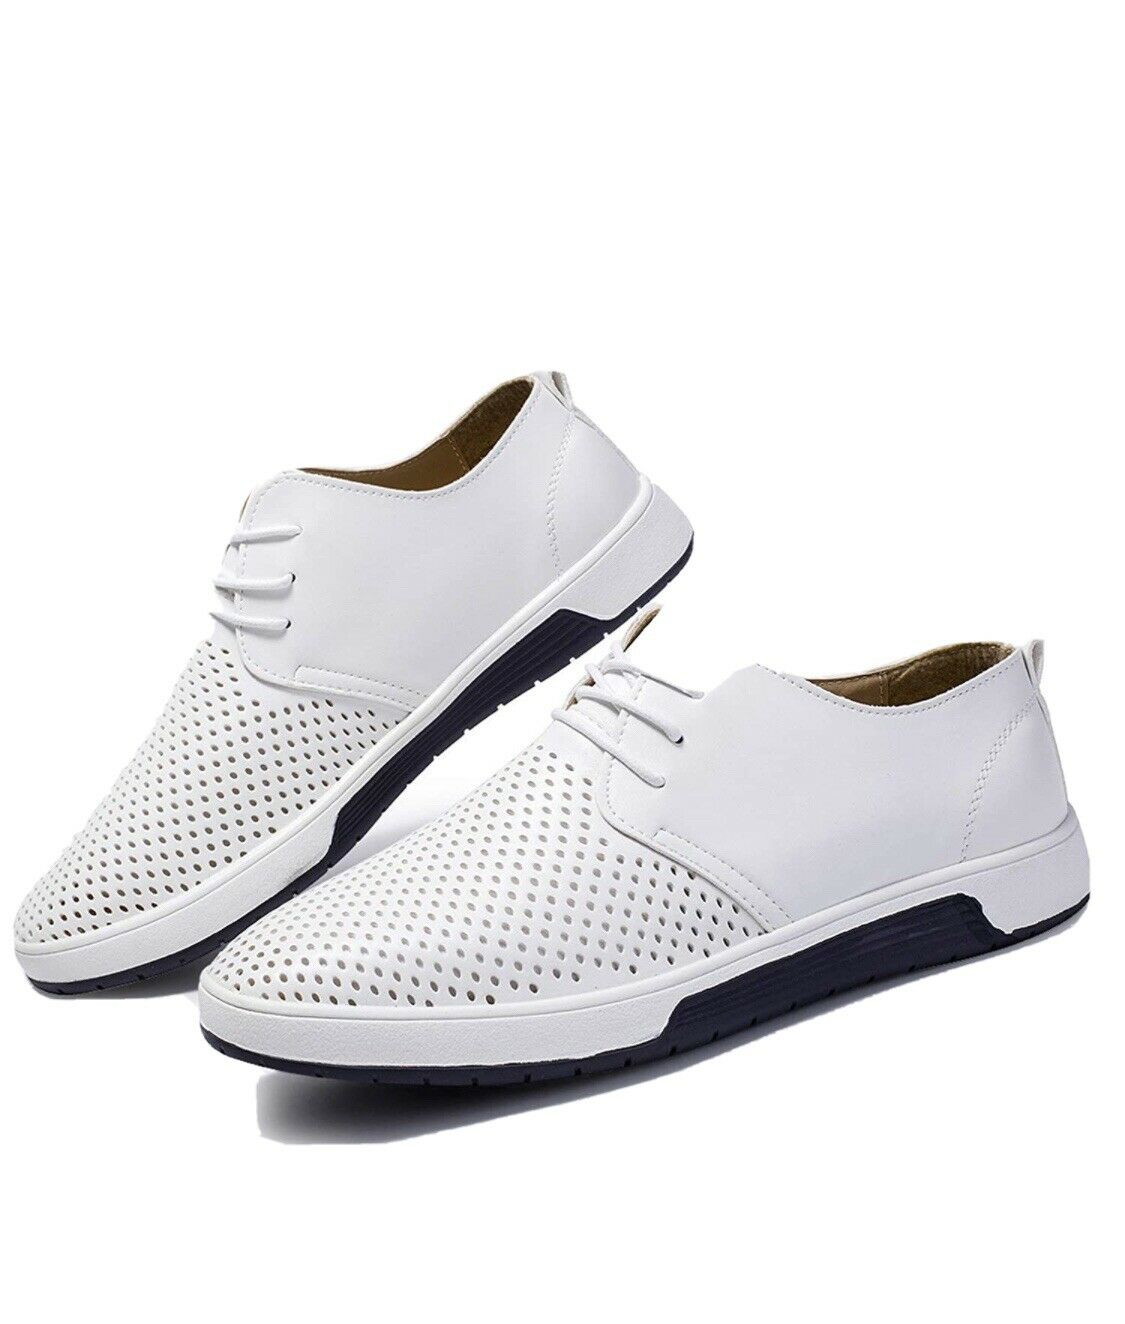 NEW Size 10 ZZHAP Men's Casual Oxford Shoes Breathable Flat Fashion Sneakers Whi